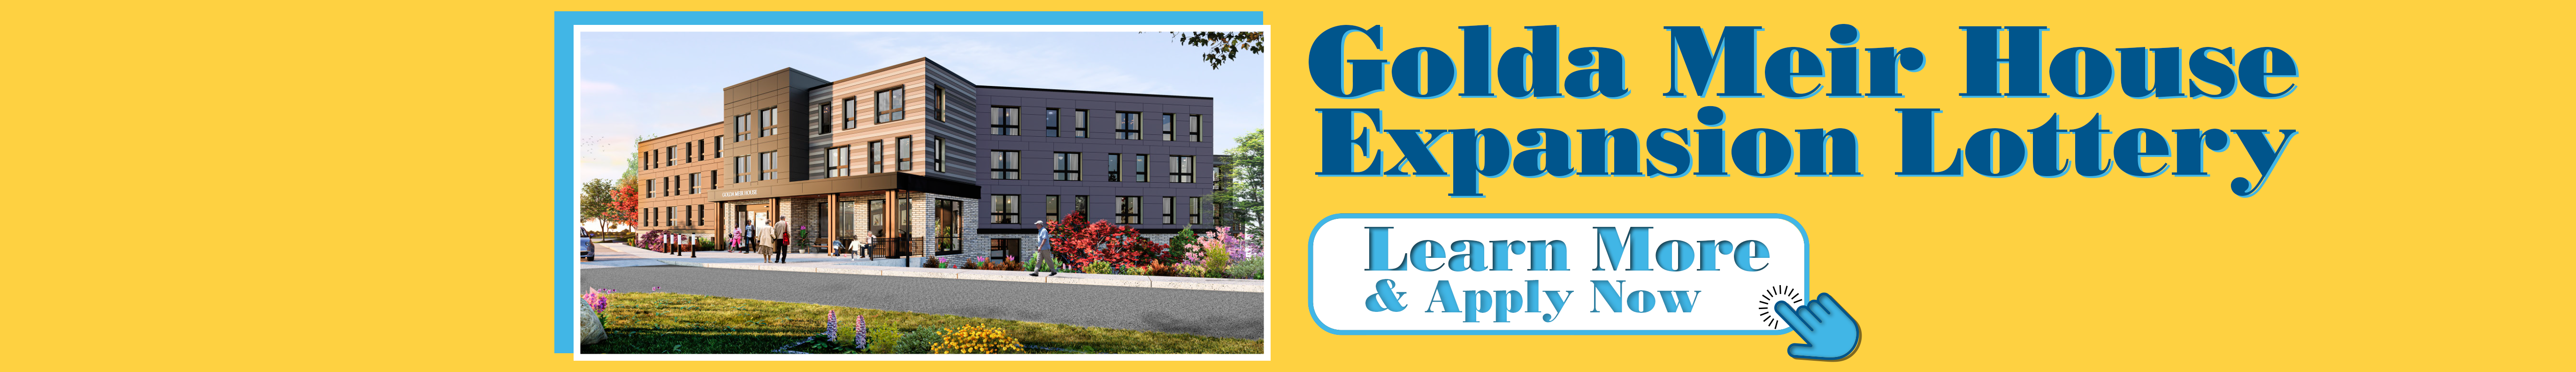 Golda Meir House Expansion Lottery - Click Here to Learn More